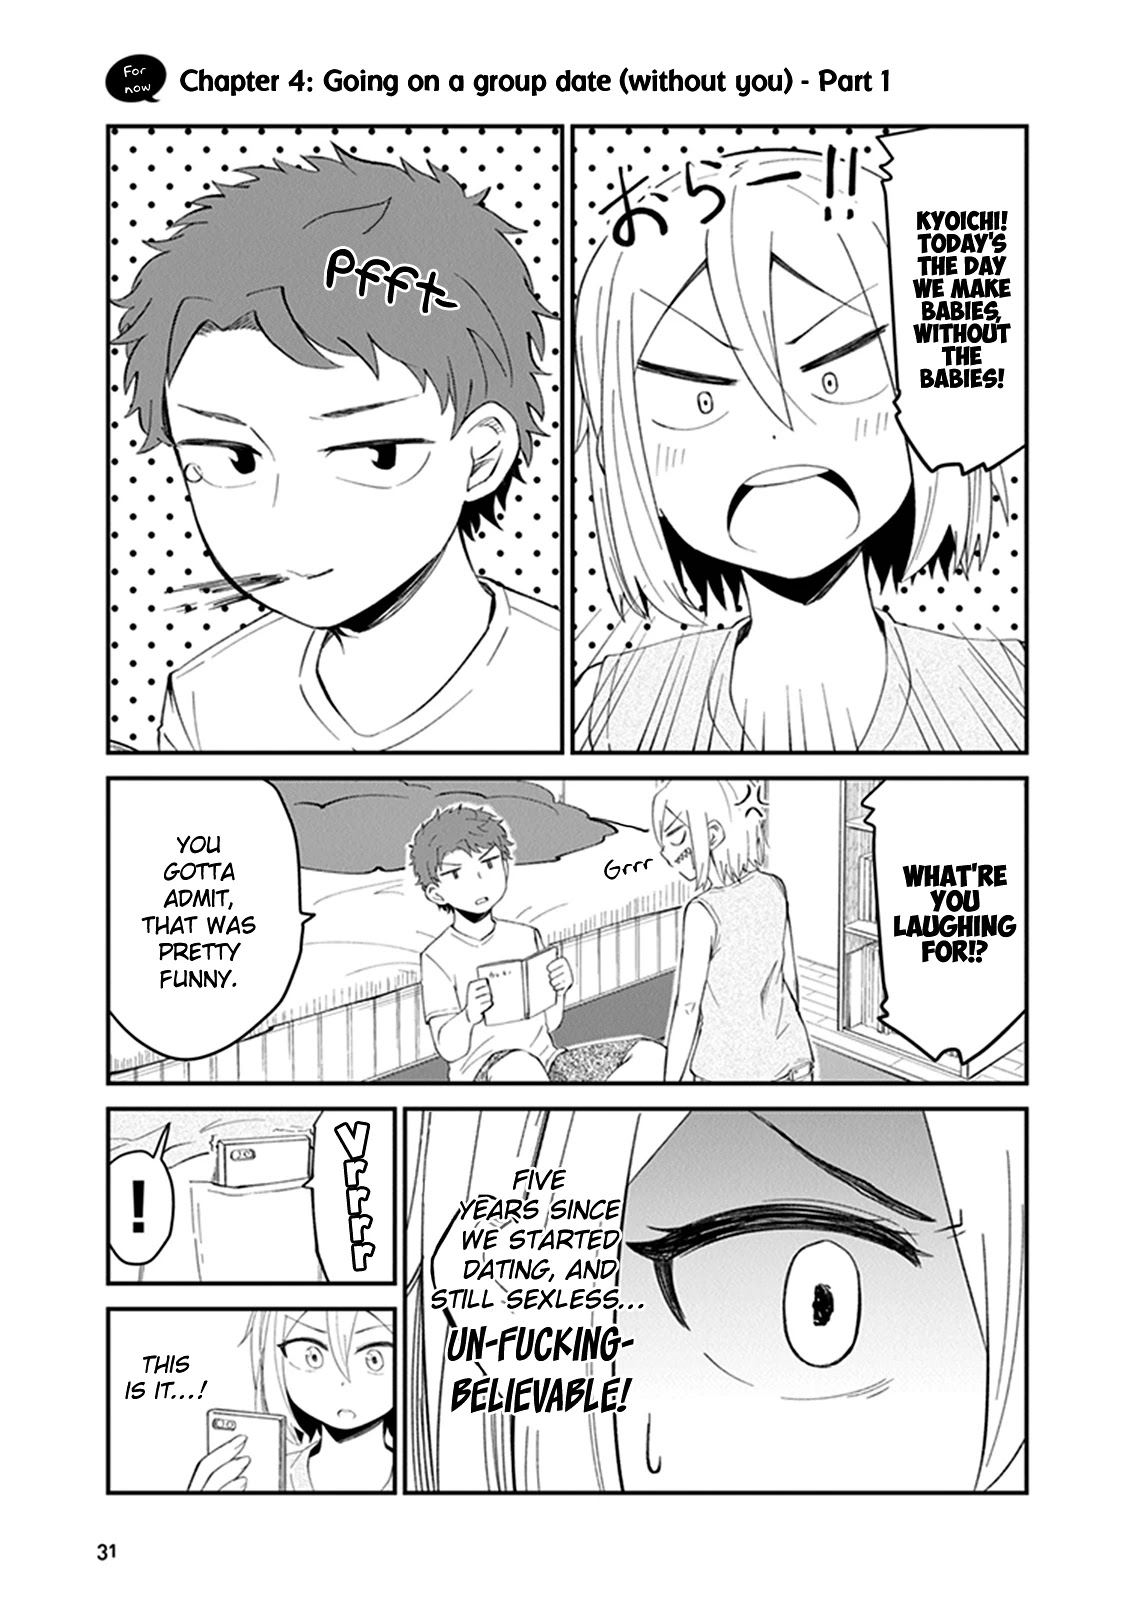 We'll Get Married Someday, But For Now - Page 1